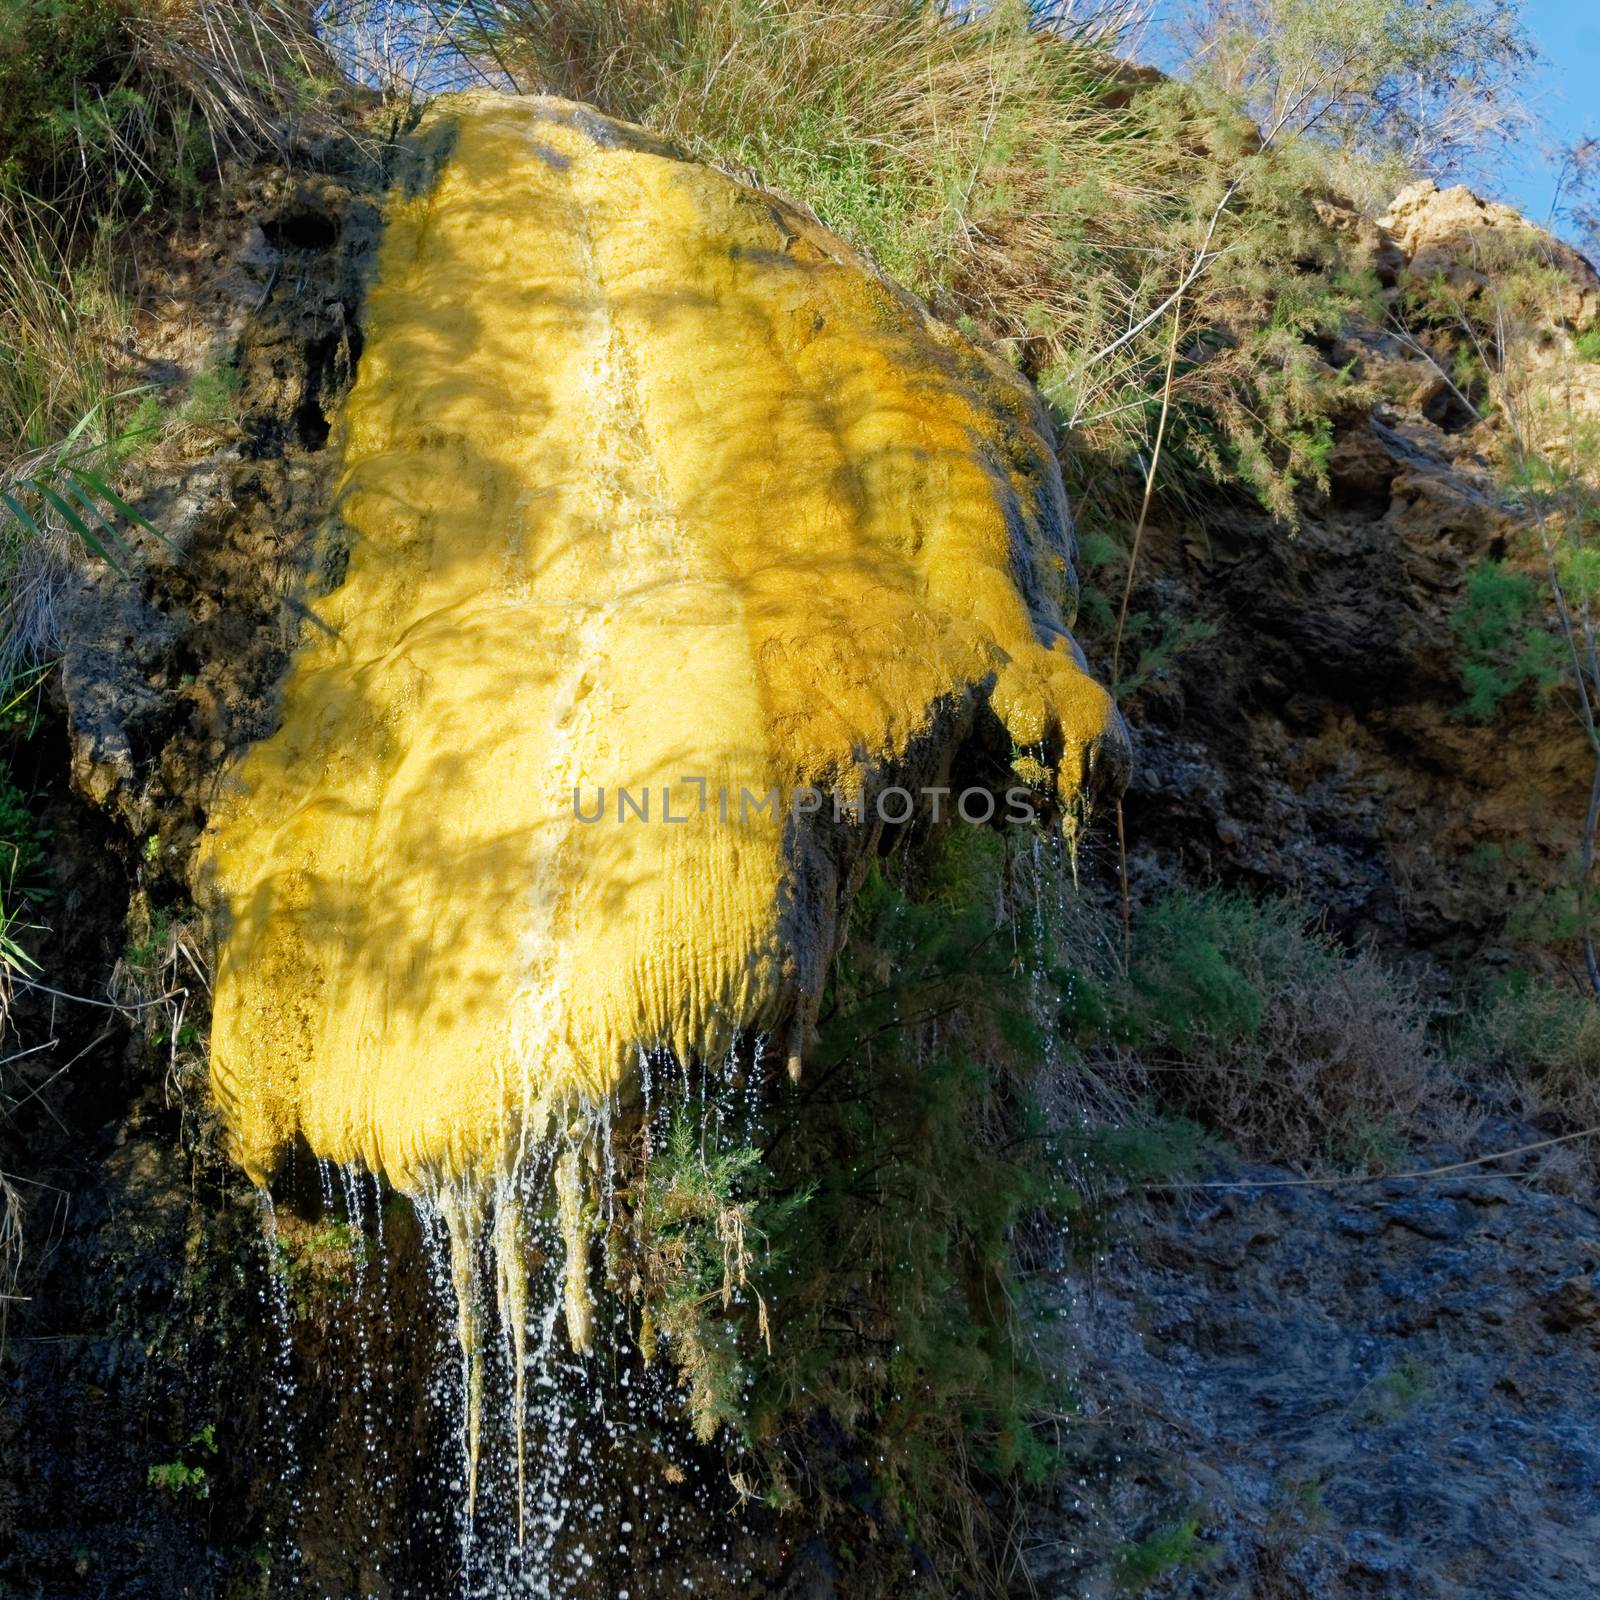 Yellow precipitation of sulphur at a secondary source of the hot springs of Main near Madaba just before the Dead Sea by geogif